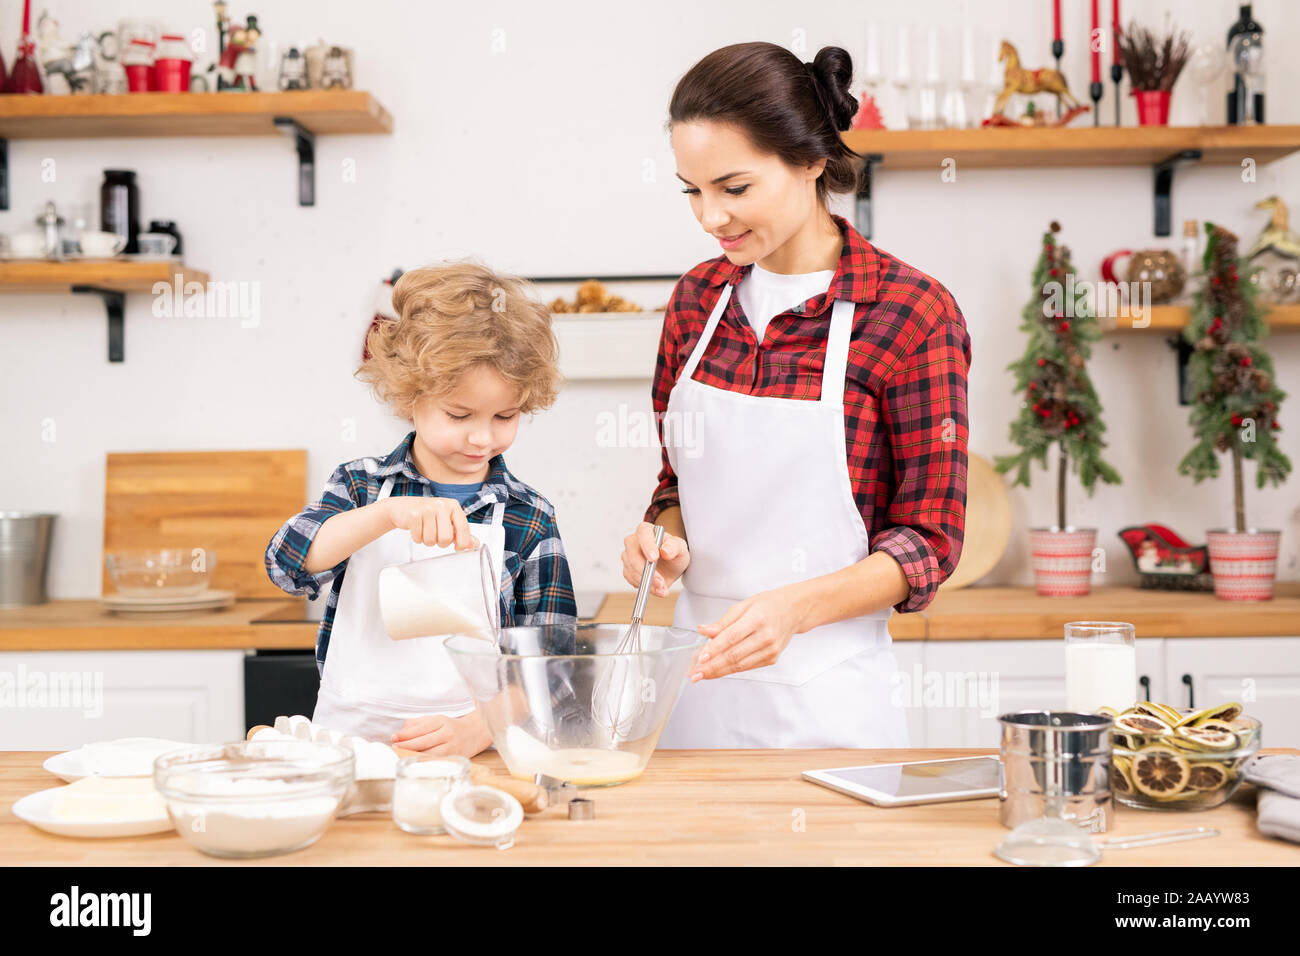 https://c8.alamy.com/comp/2AAYW83/cute-little-boy-adding-sugar-into-shaked-raw-eggs-in-bowl-while-helping-his-mother-with-dough-for-homemade-pastry-in-the-kitchen-2AAYW83.jpg